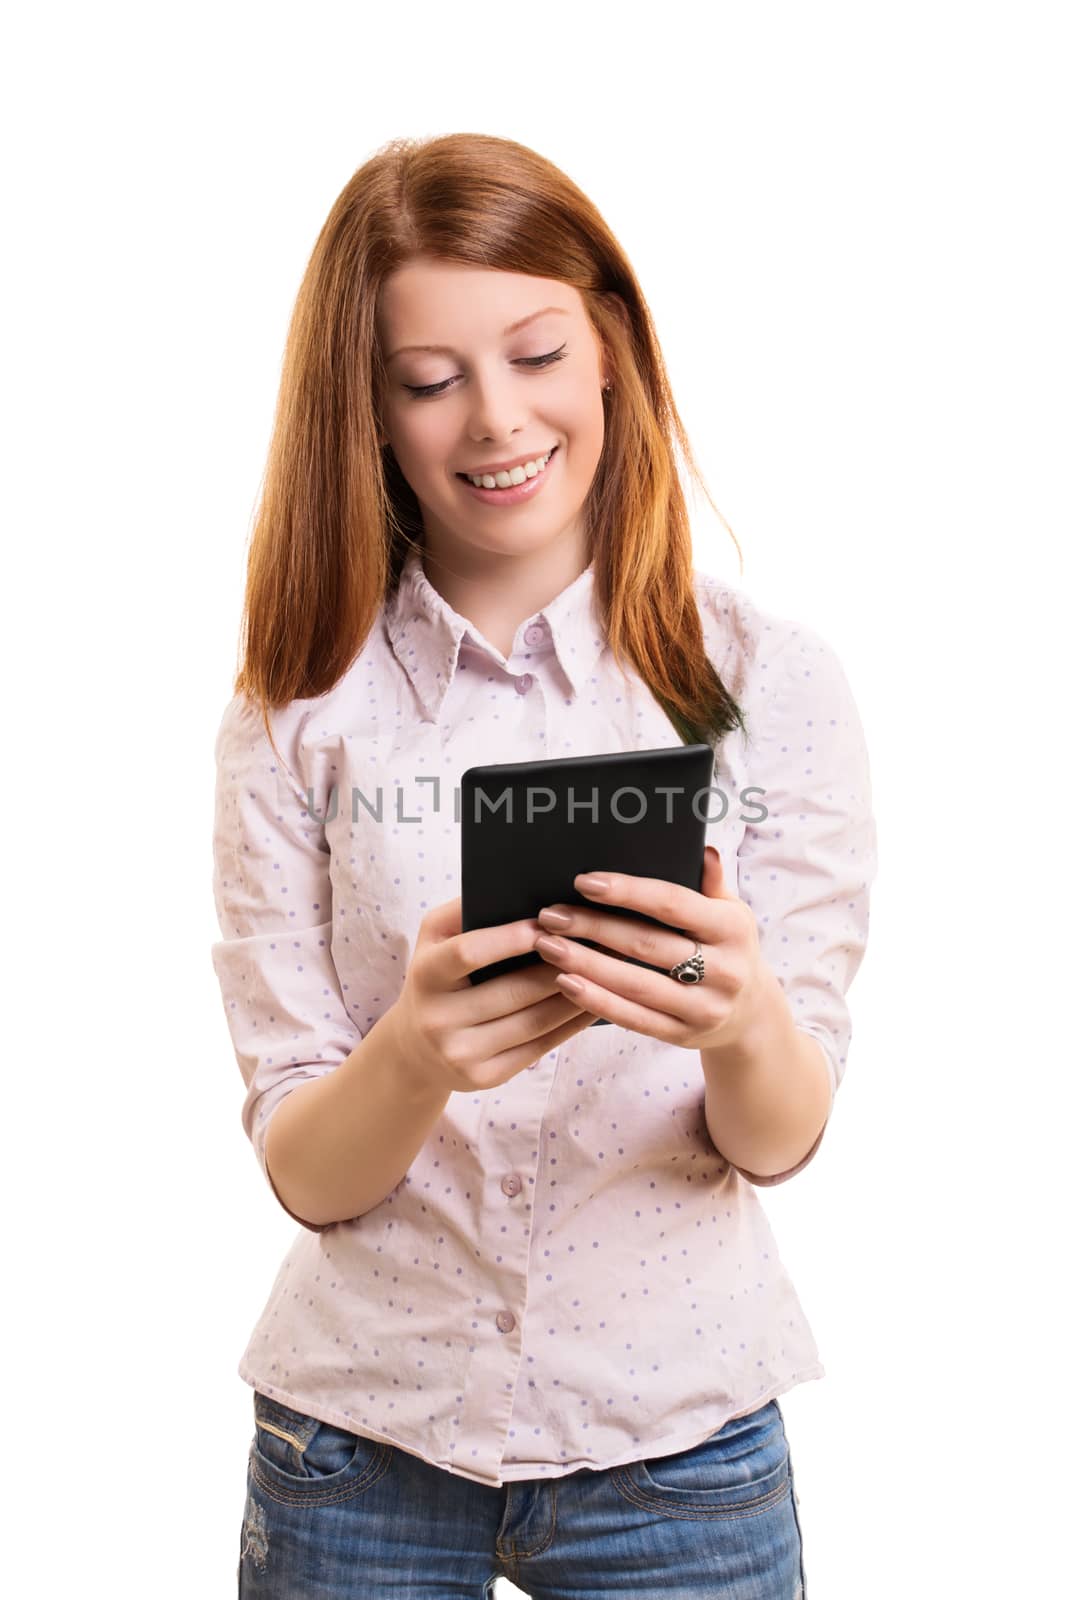 A portrait of a smiling female student holding a tablet, isolated on white background.